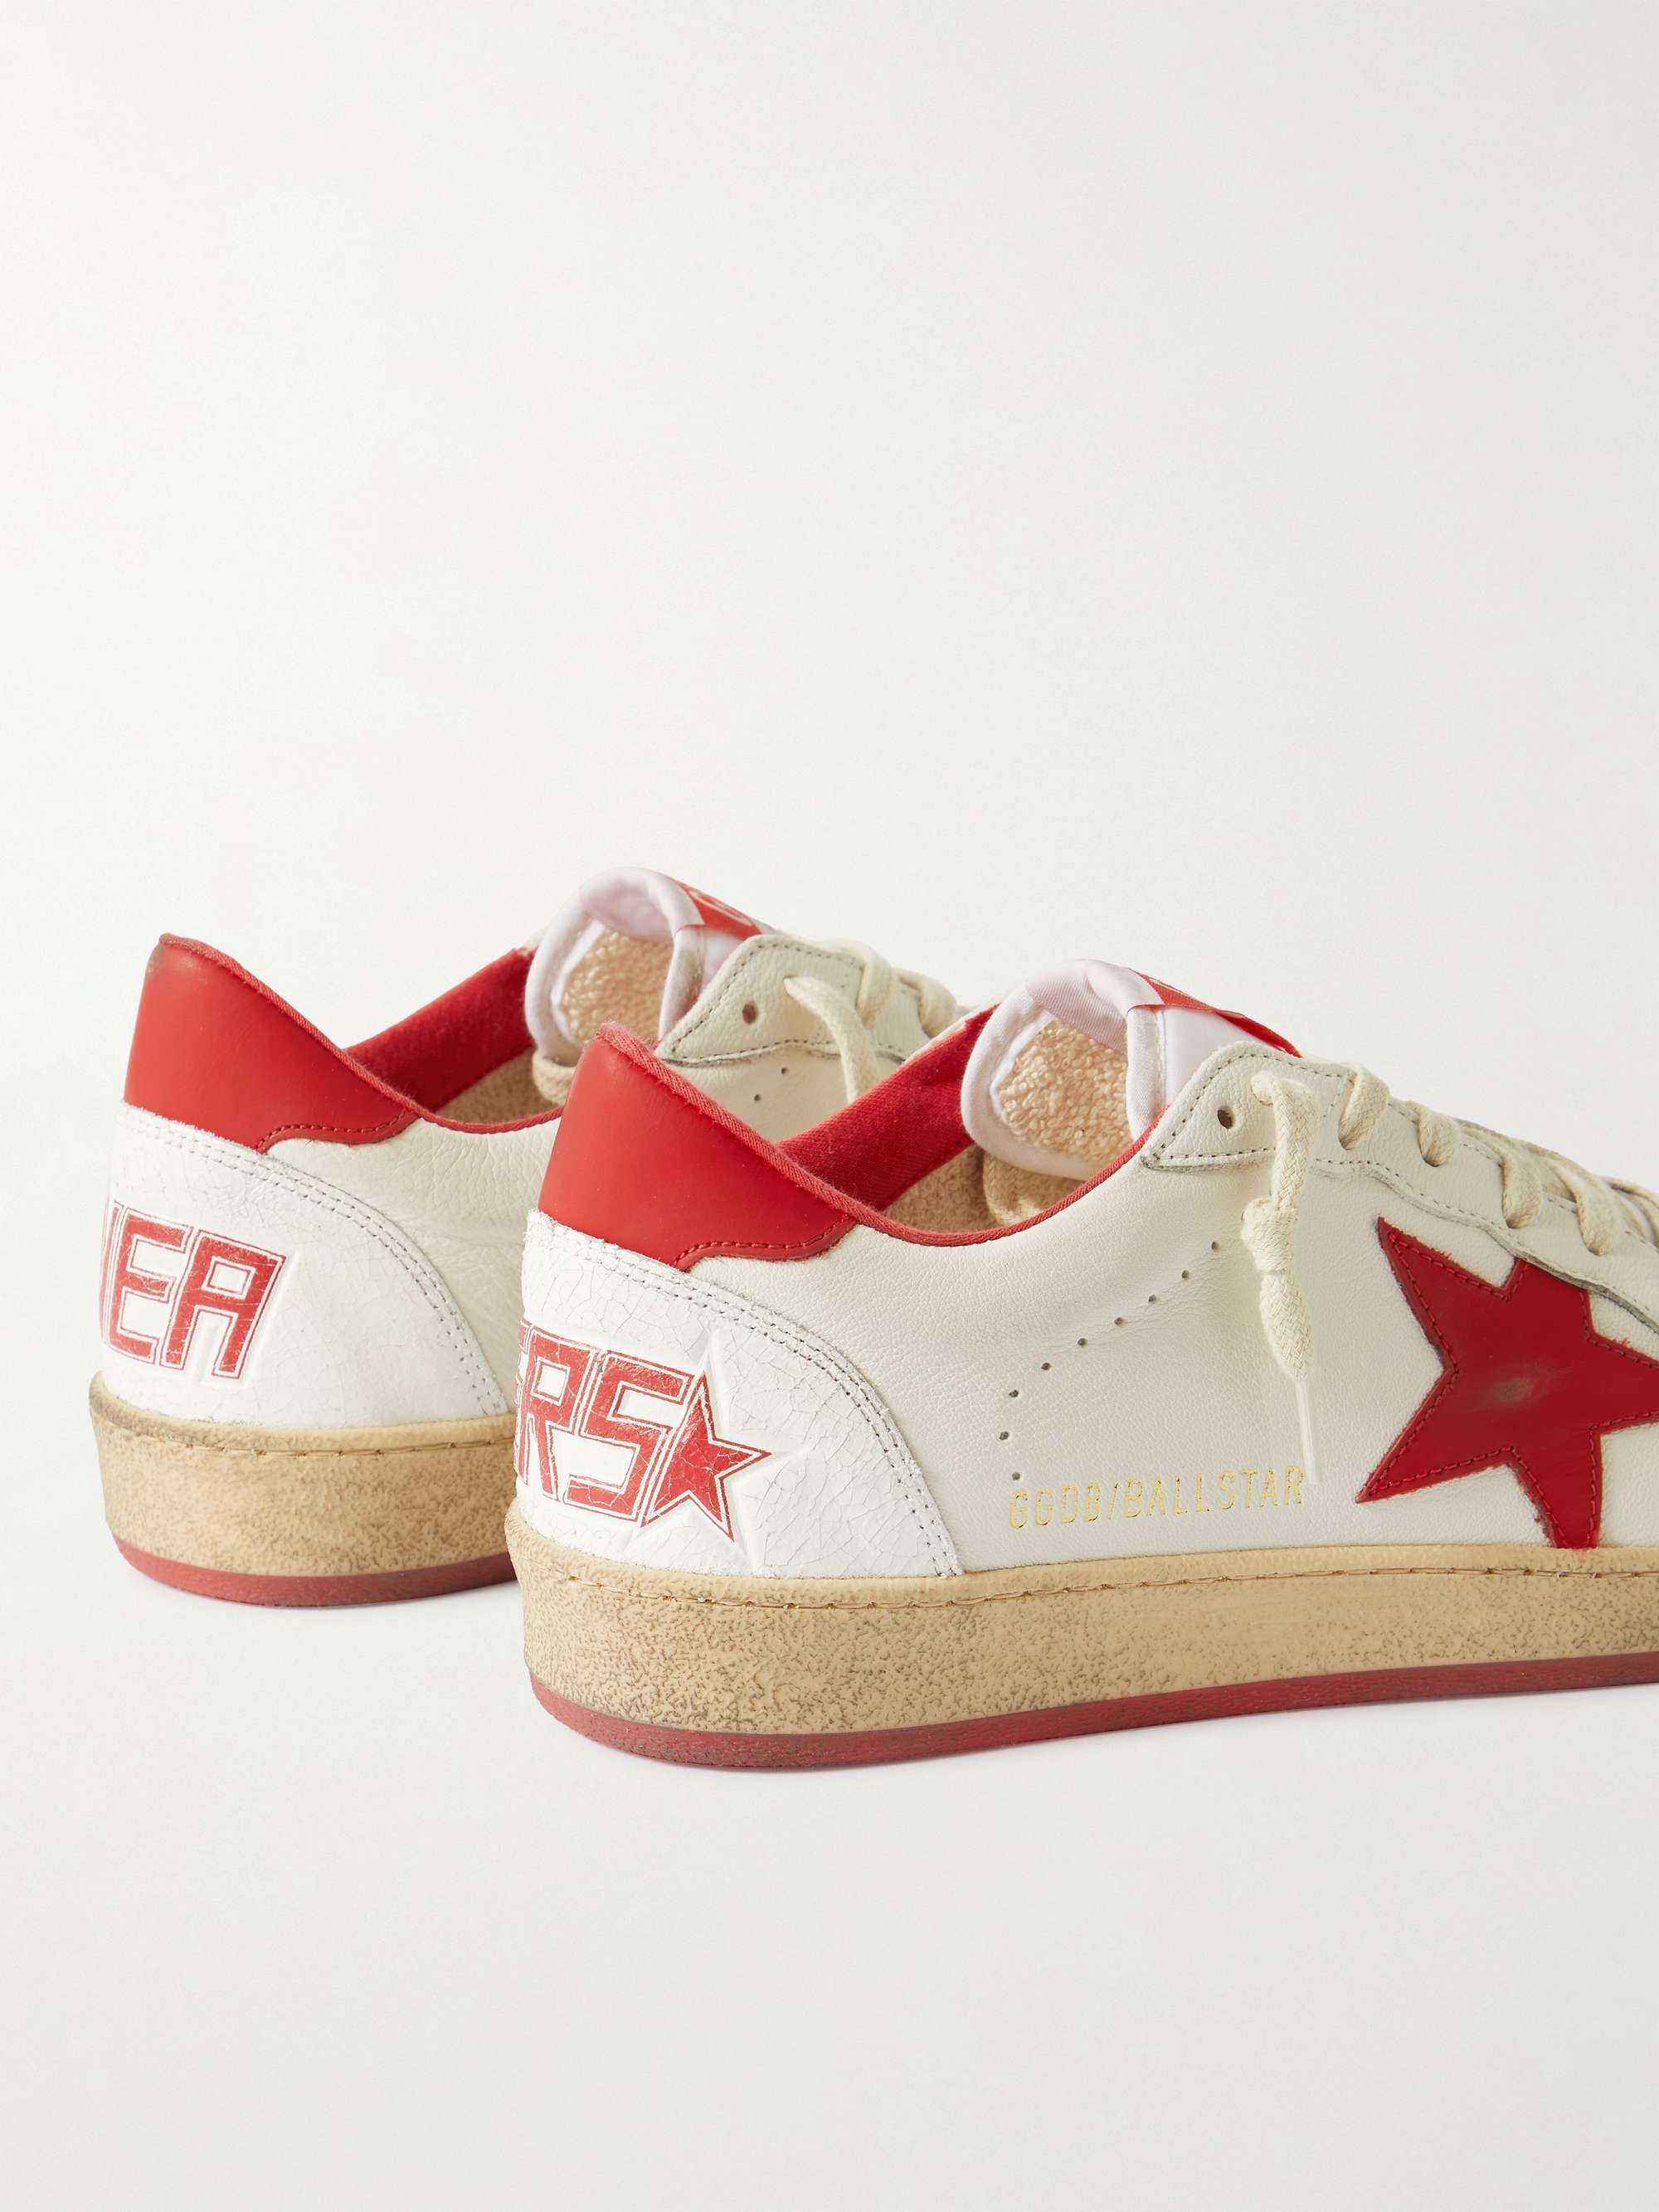 GOLDEN GOOSE Ballstar Distressed Leather Sneakers